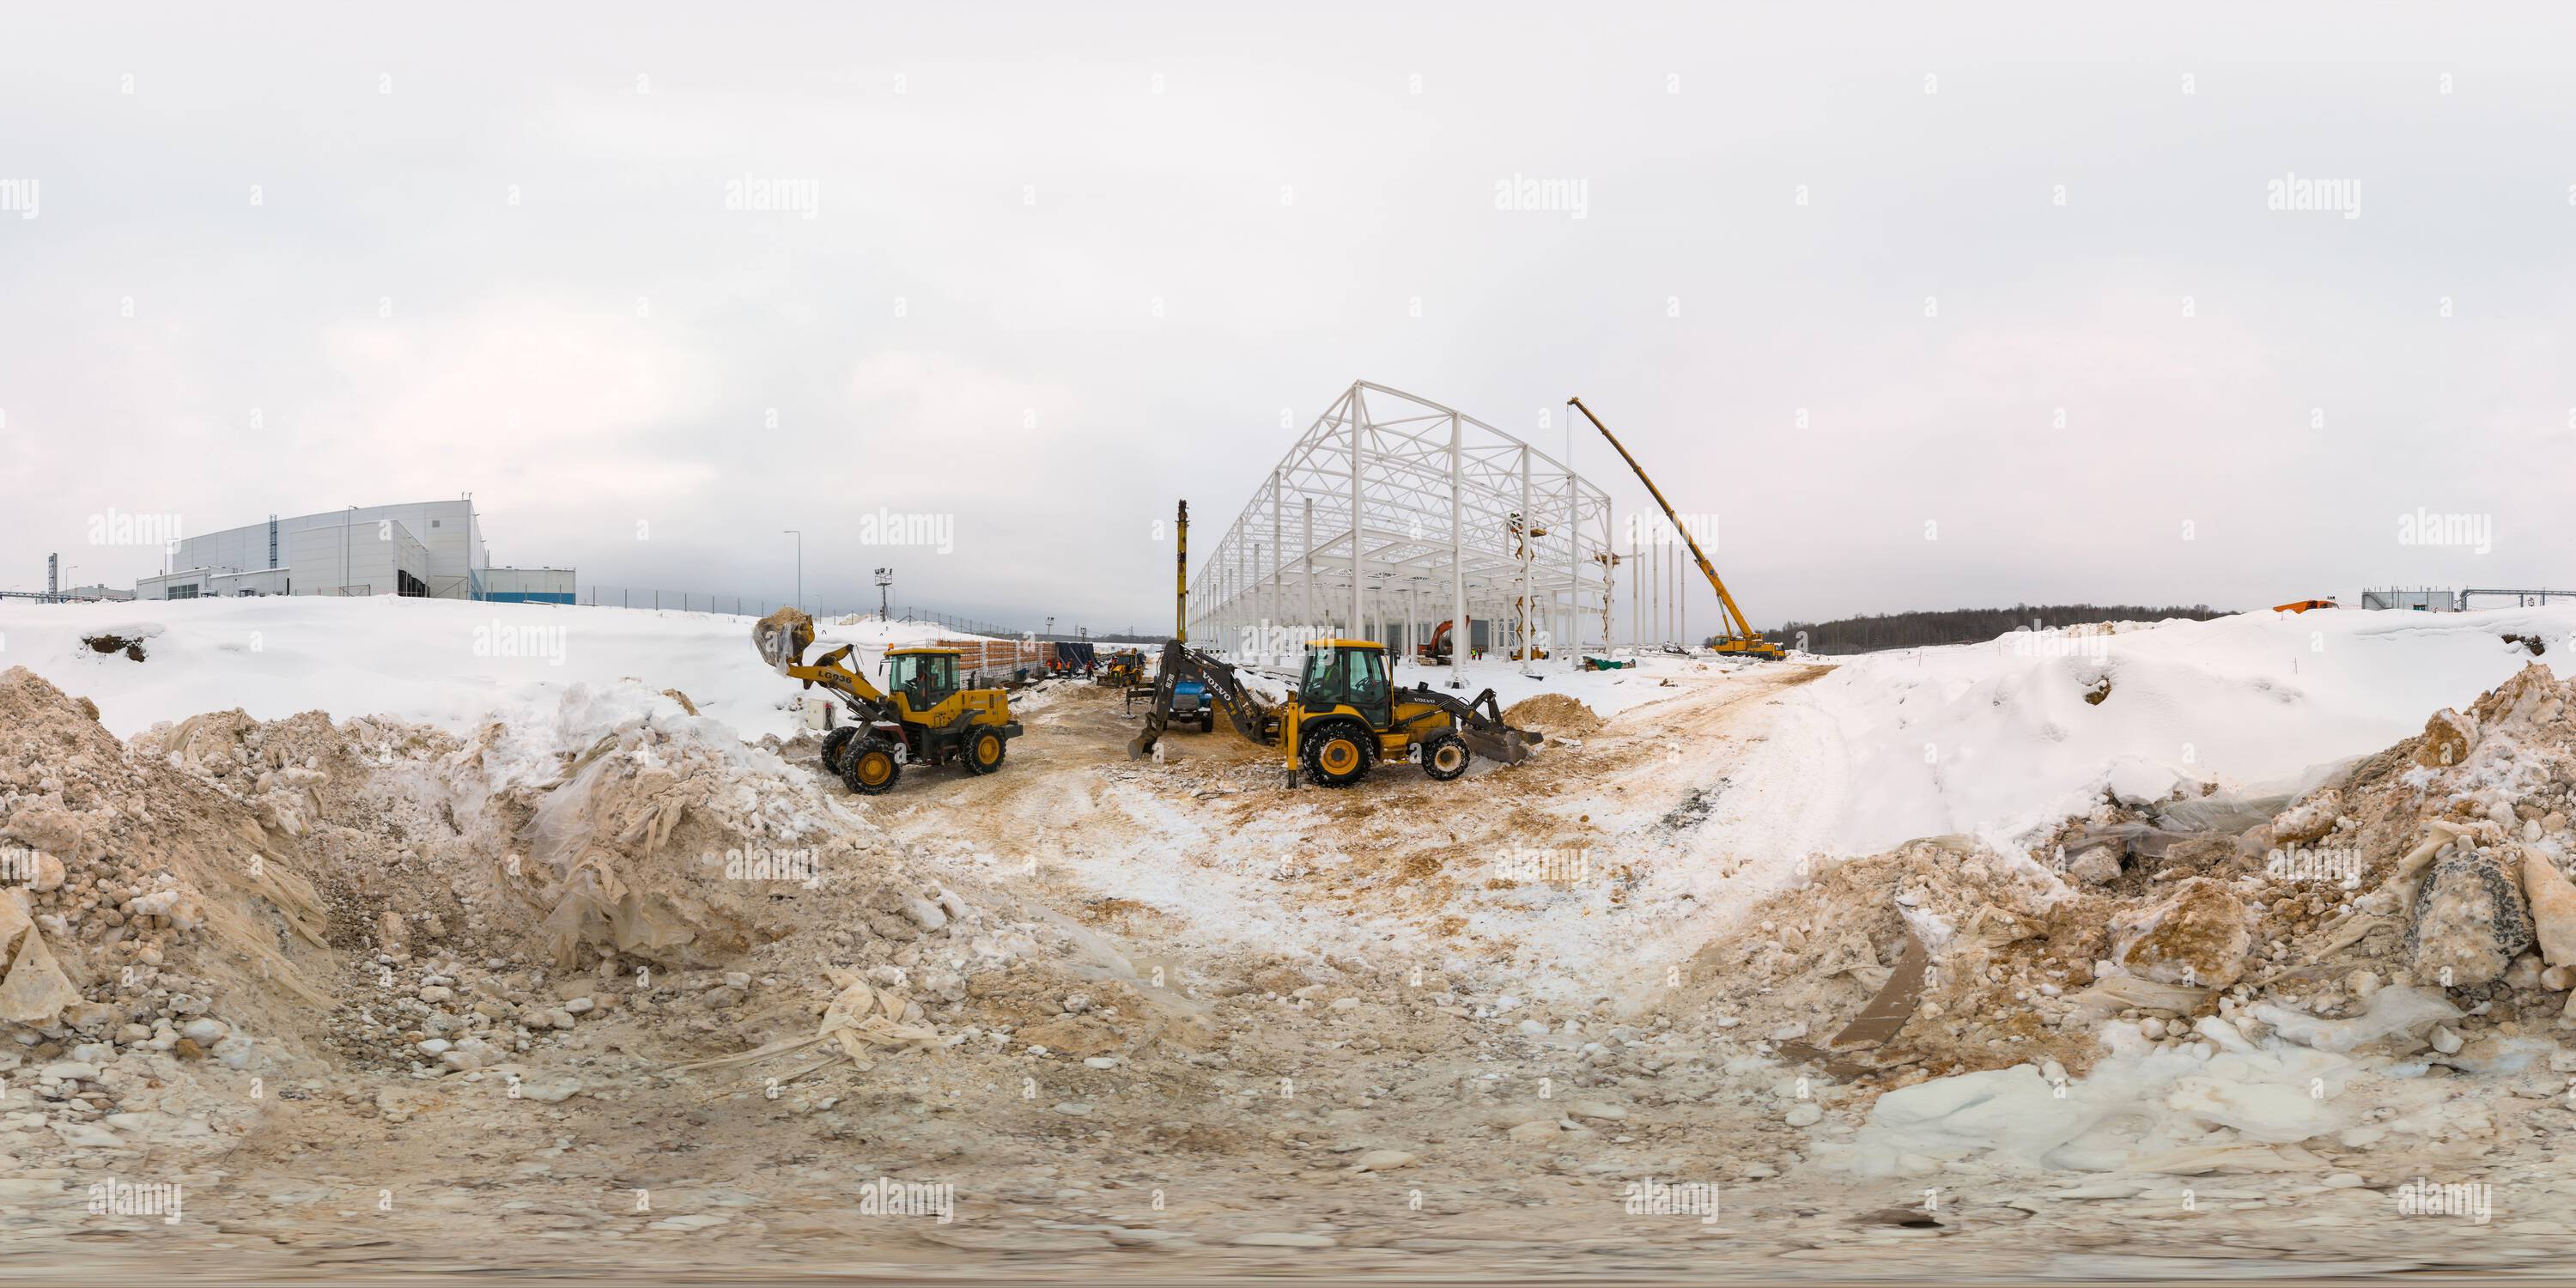 360 degree panoramic view of Seamless full spherical 360 degree panorama in equirectangular projection of winter industrial building process in Tula, Russia - February 5, 2013